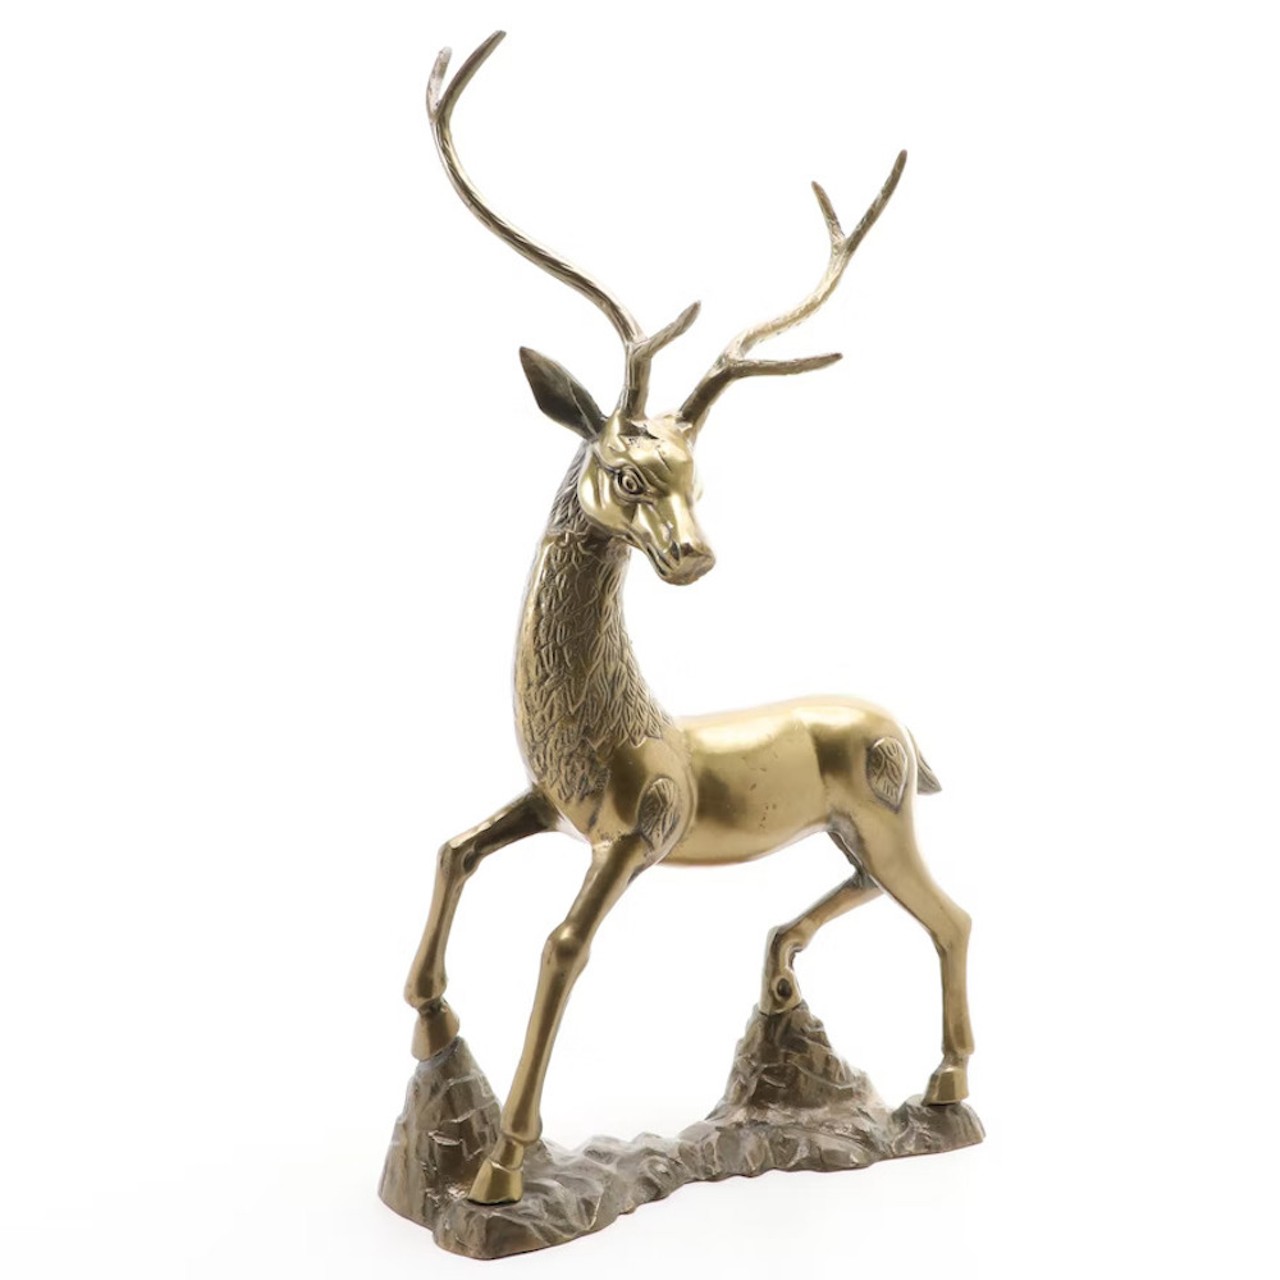 Middle Eastern Style Brass Standing Stag
A piece of holiday decor worth gifting is this solid brass stag. Brass is all the rage for interior decorating right now and this stag can double as holiday decor with the right staging. Make a small wreath with some faux greenery and ribbon to hang around the stag’s neck, or place small ornament bulbs on his antlers. Bonus points if you include those bottle-brush trees in the dollar section at Target.